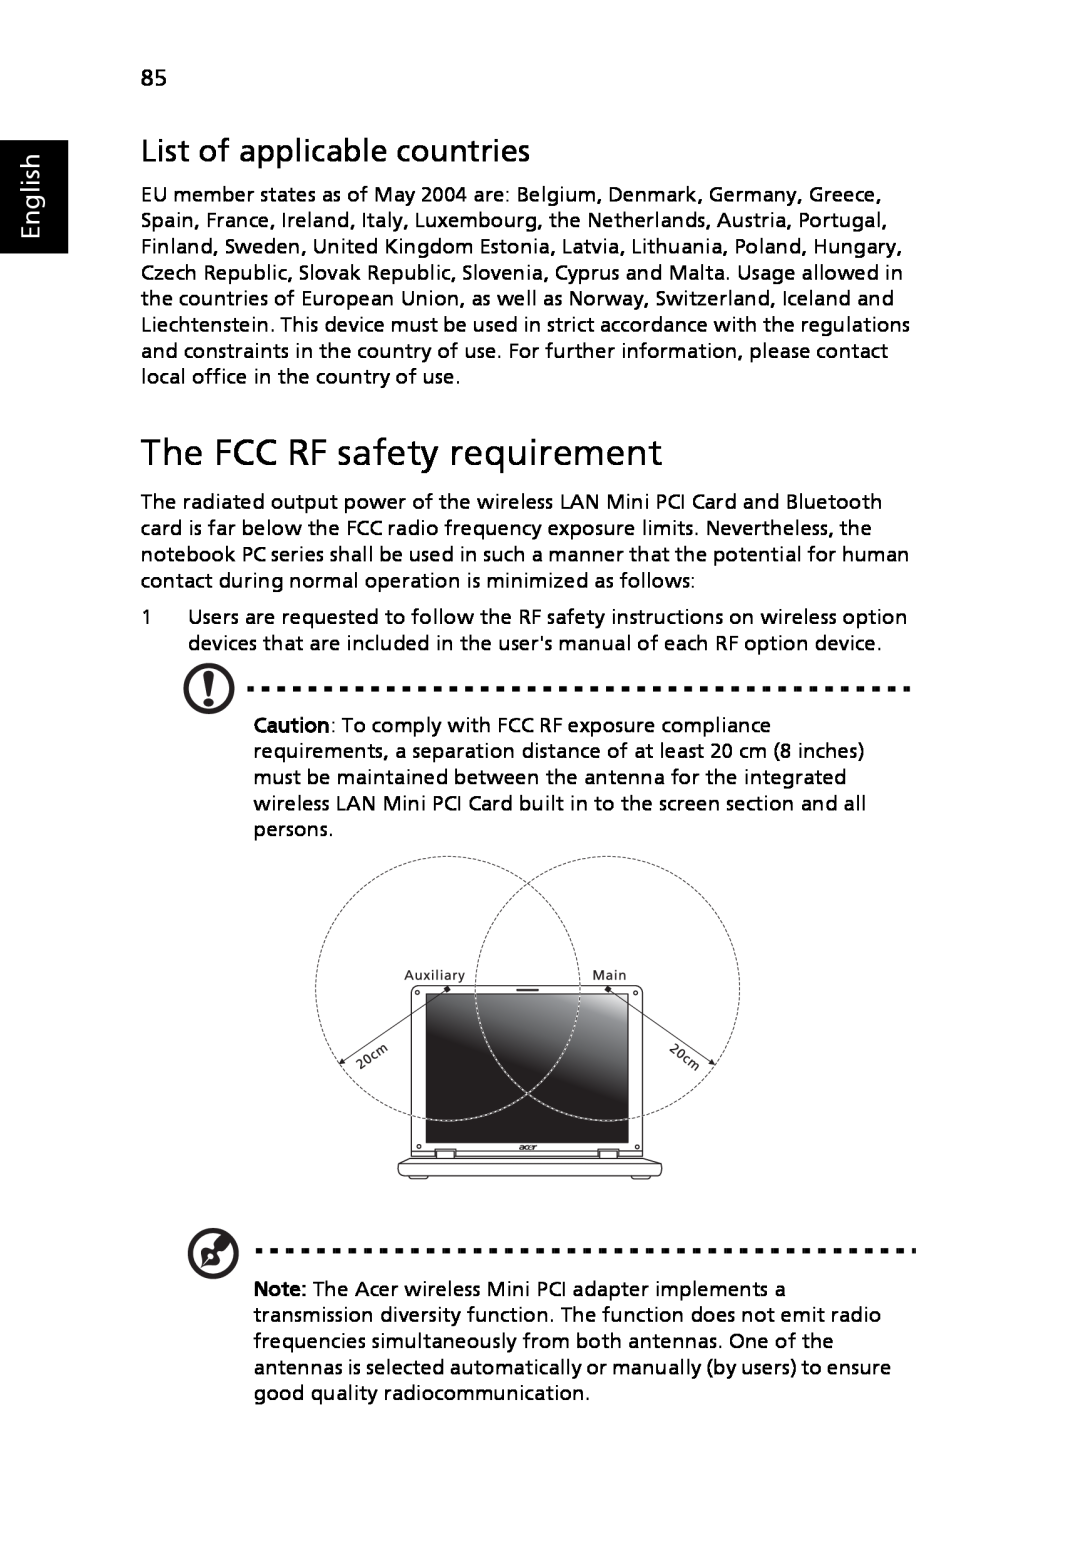 Acer 8920 Series, LE1 manual The FCC RF safety requirement, List of applicable countries, English 